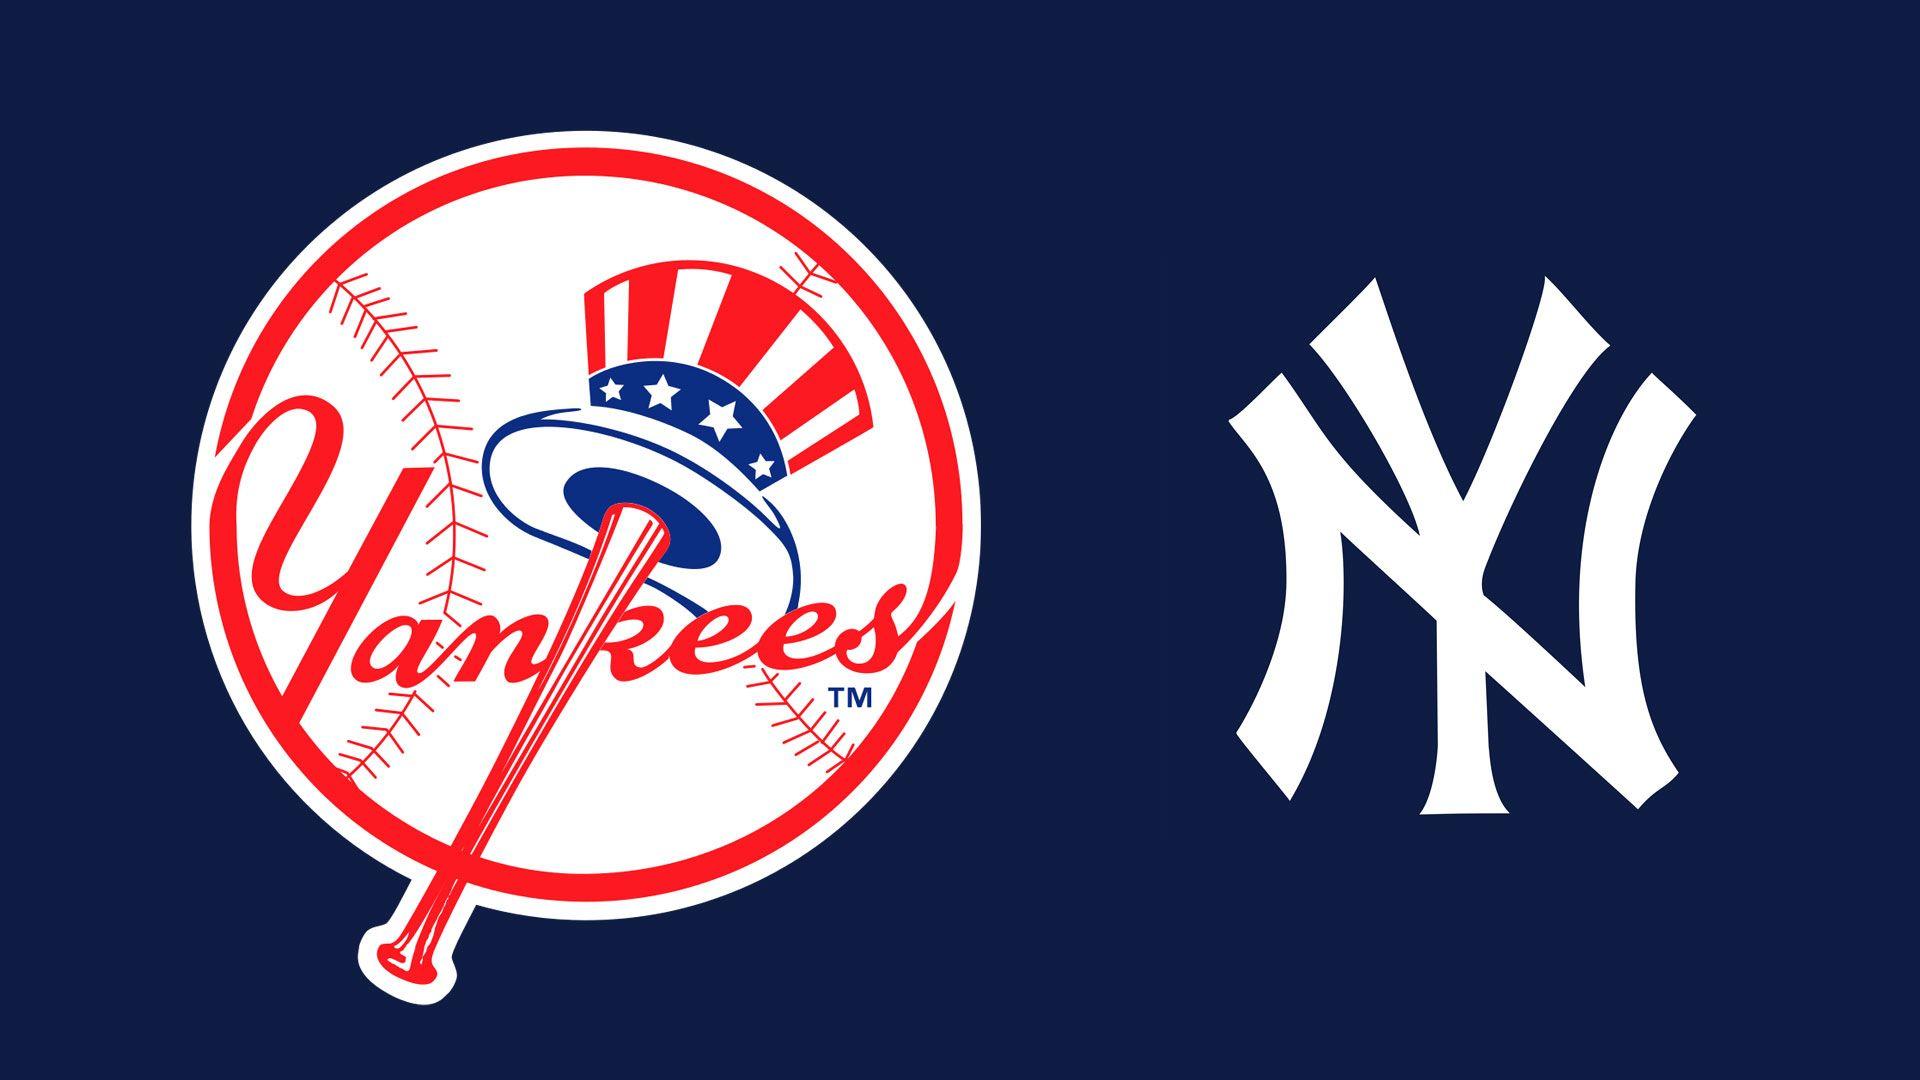 New York Yankees Logo Wallpaper  Logos And Uniforms Of The New York Giants  PNG Image  Transparent PNG Free Download on SeekPNG